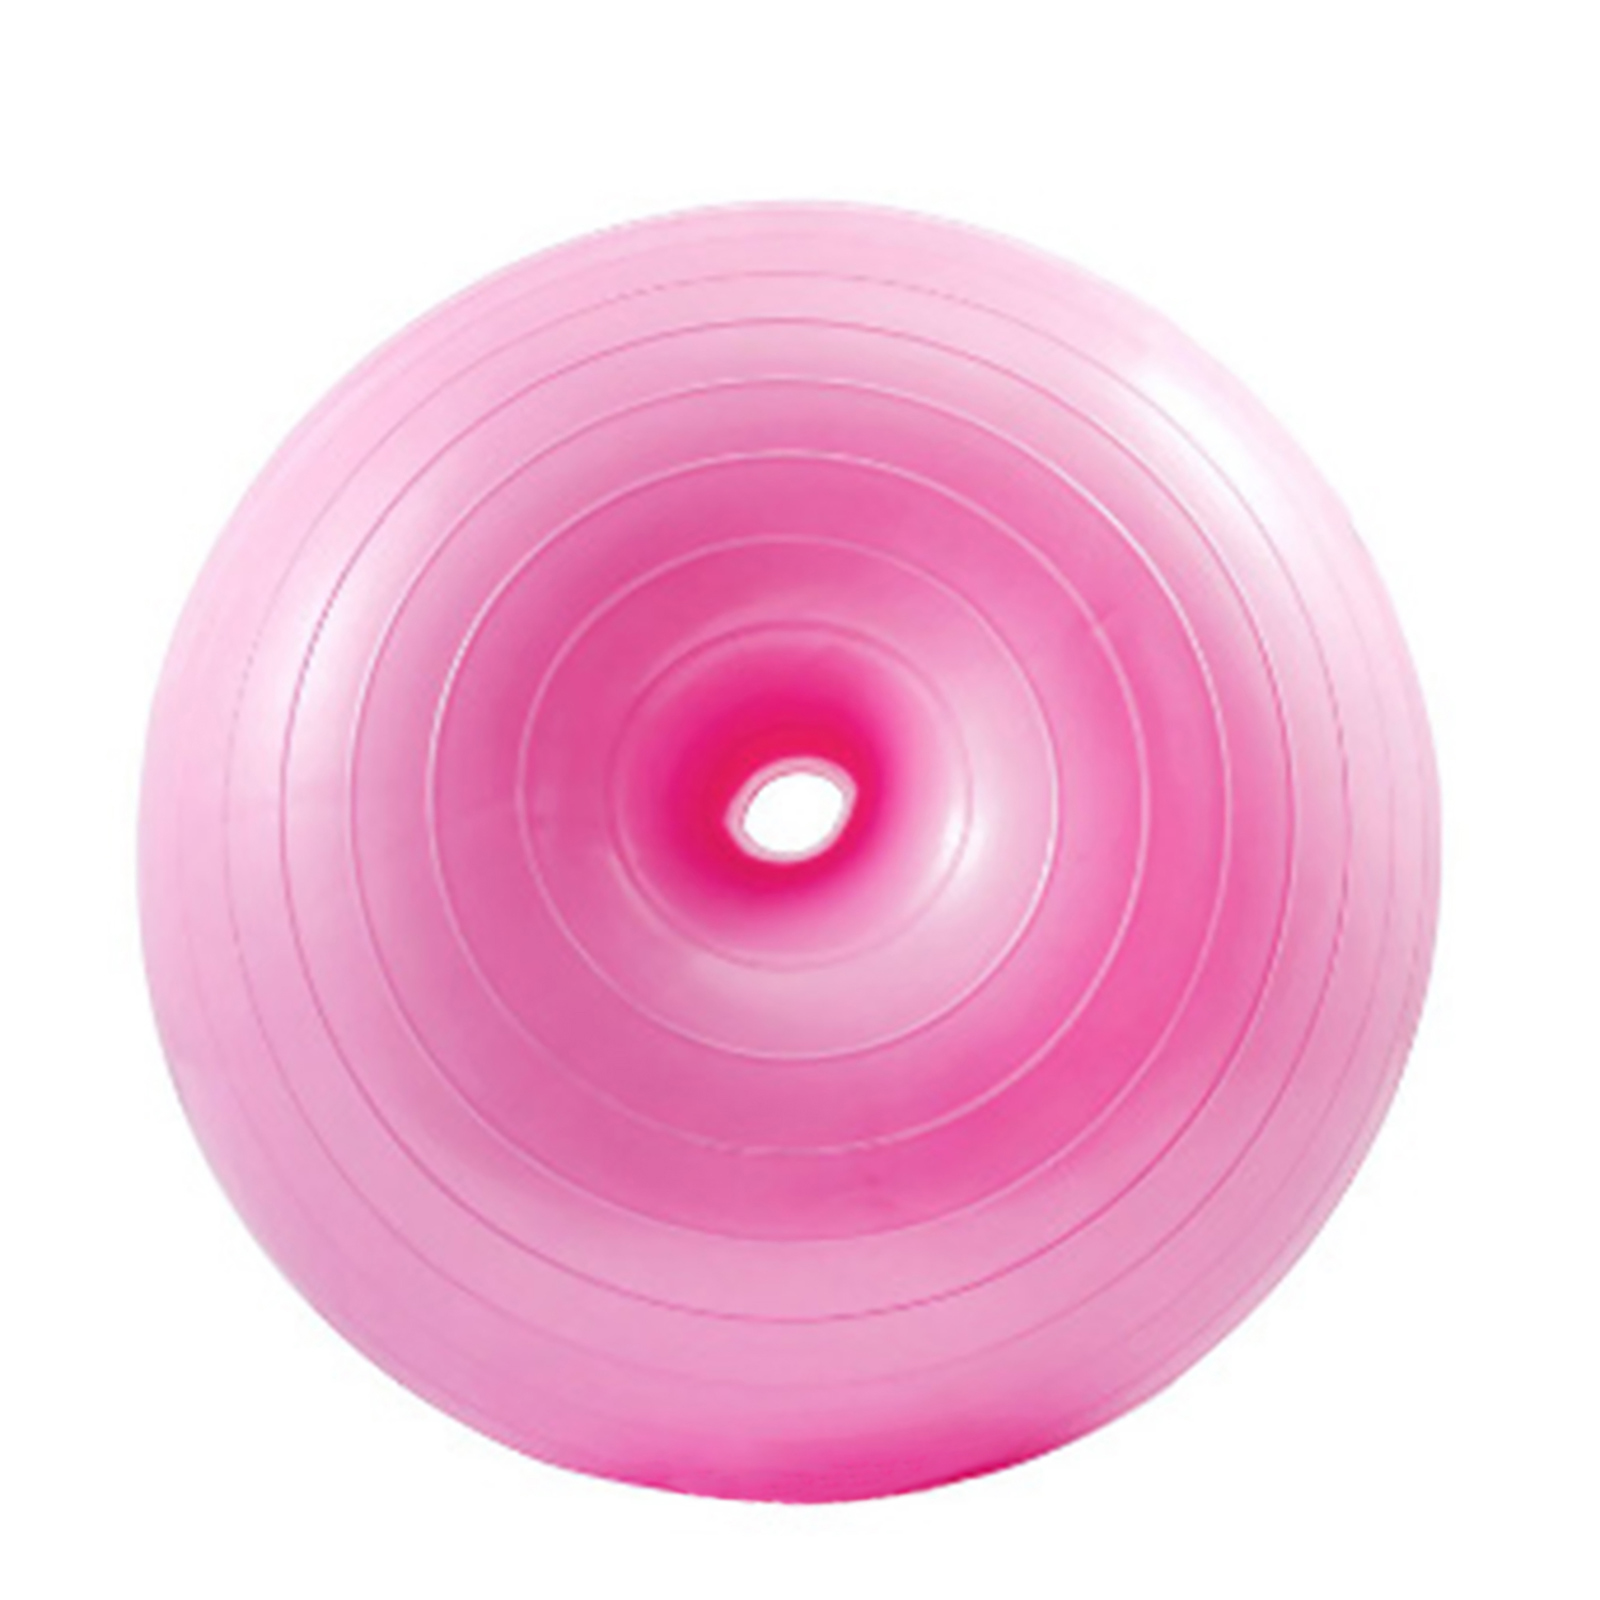 Donut Exercise Ball Workout Core Training Ball Swiss Stability Ball